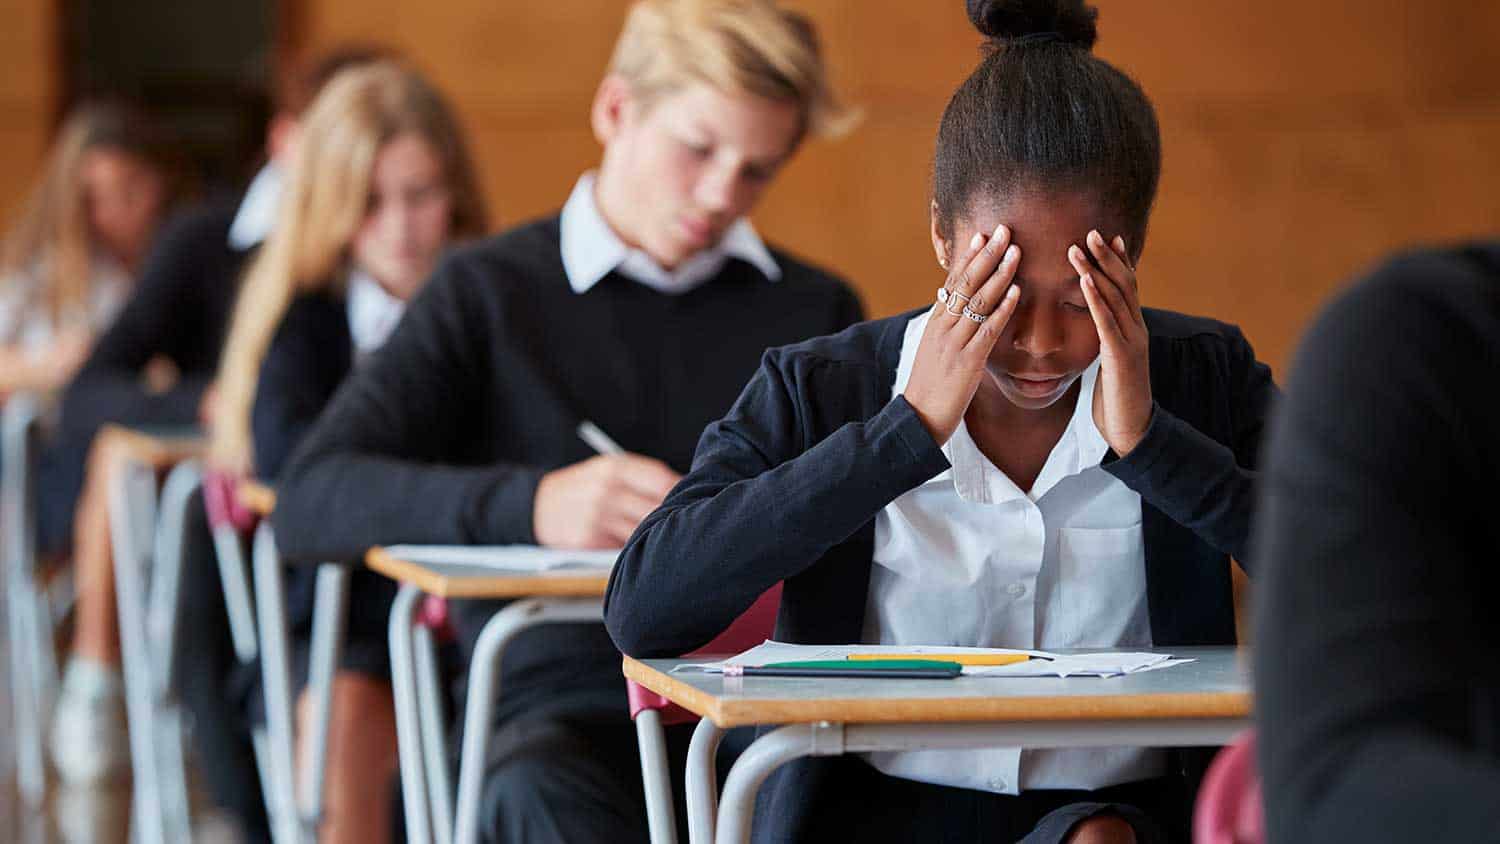 Teenagers taking an exam, one holds her head in her hands